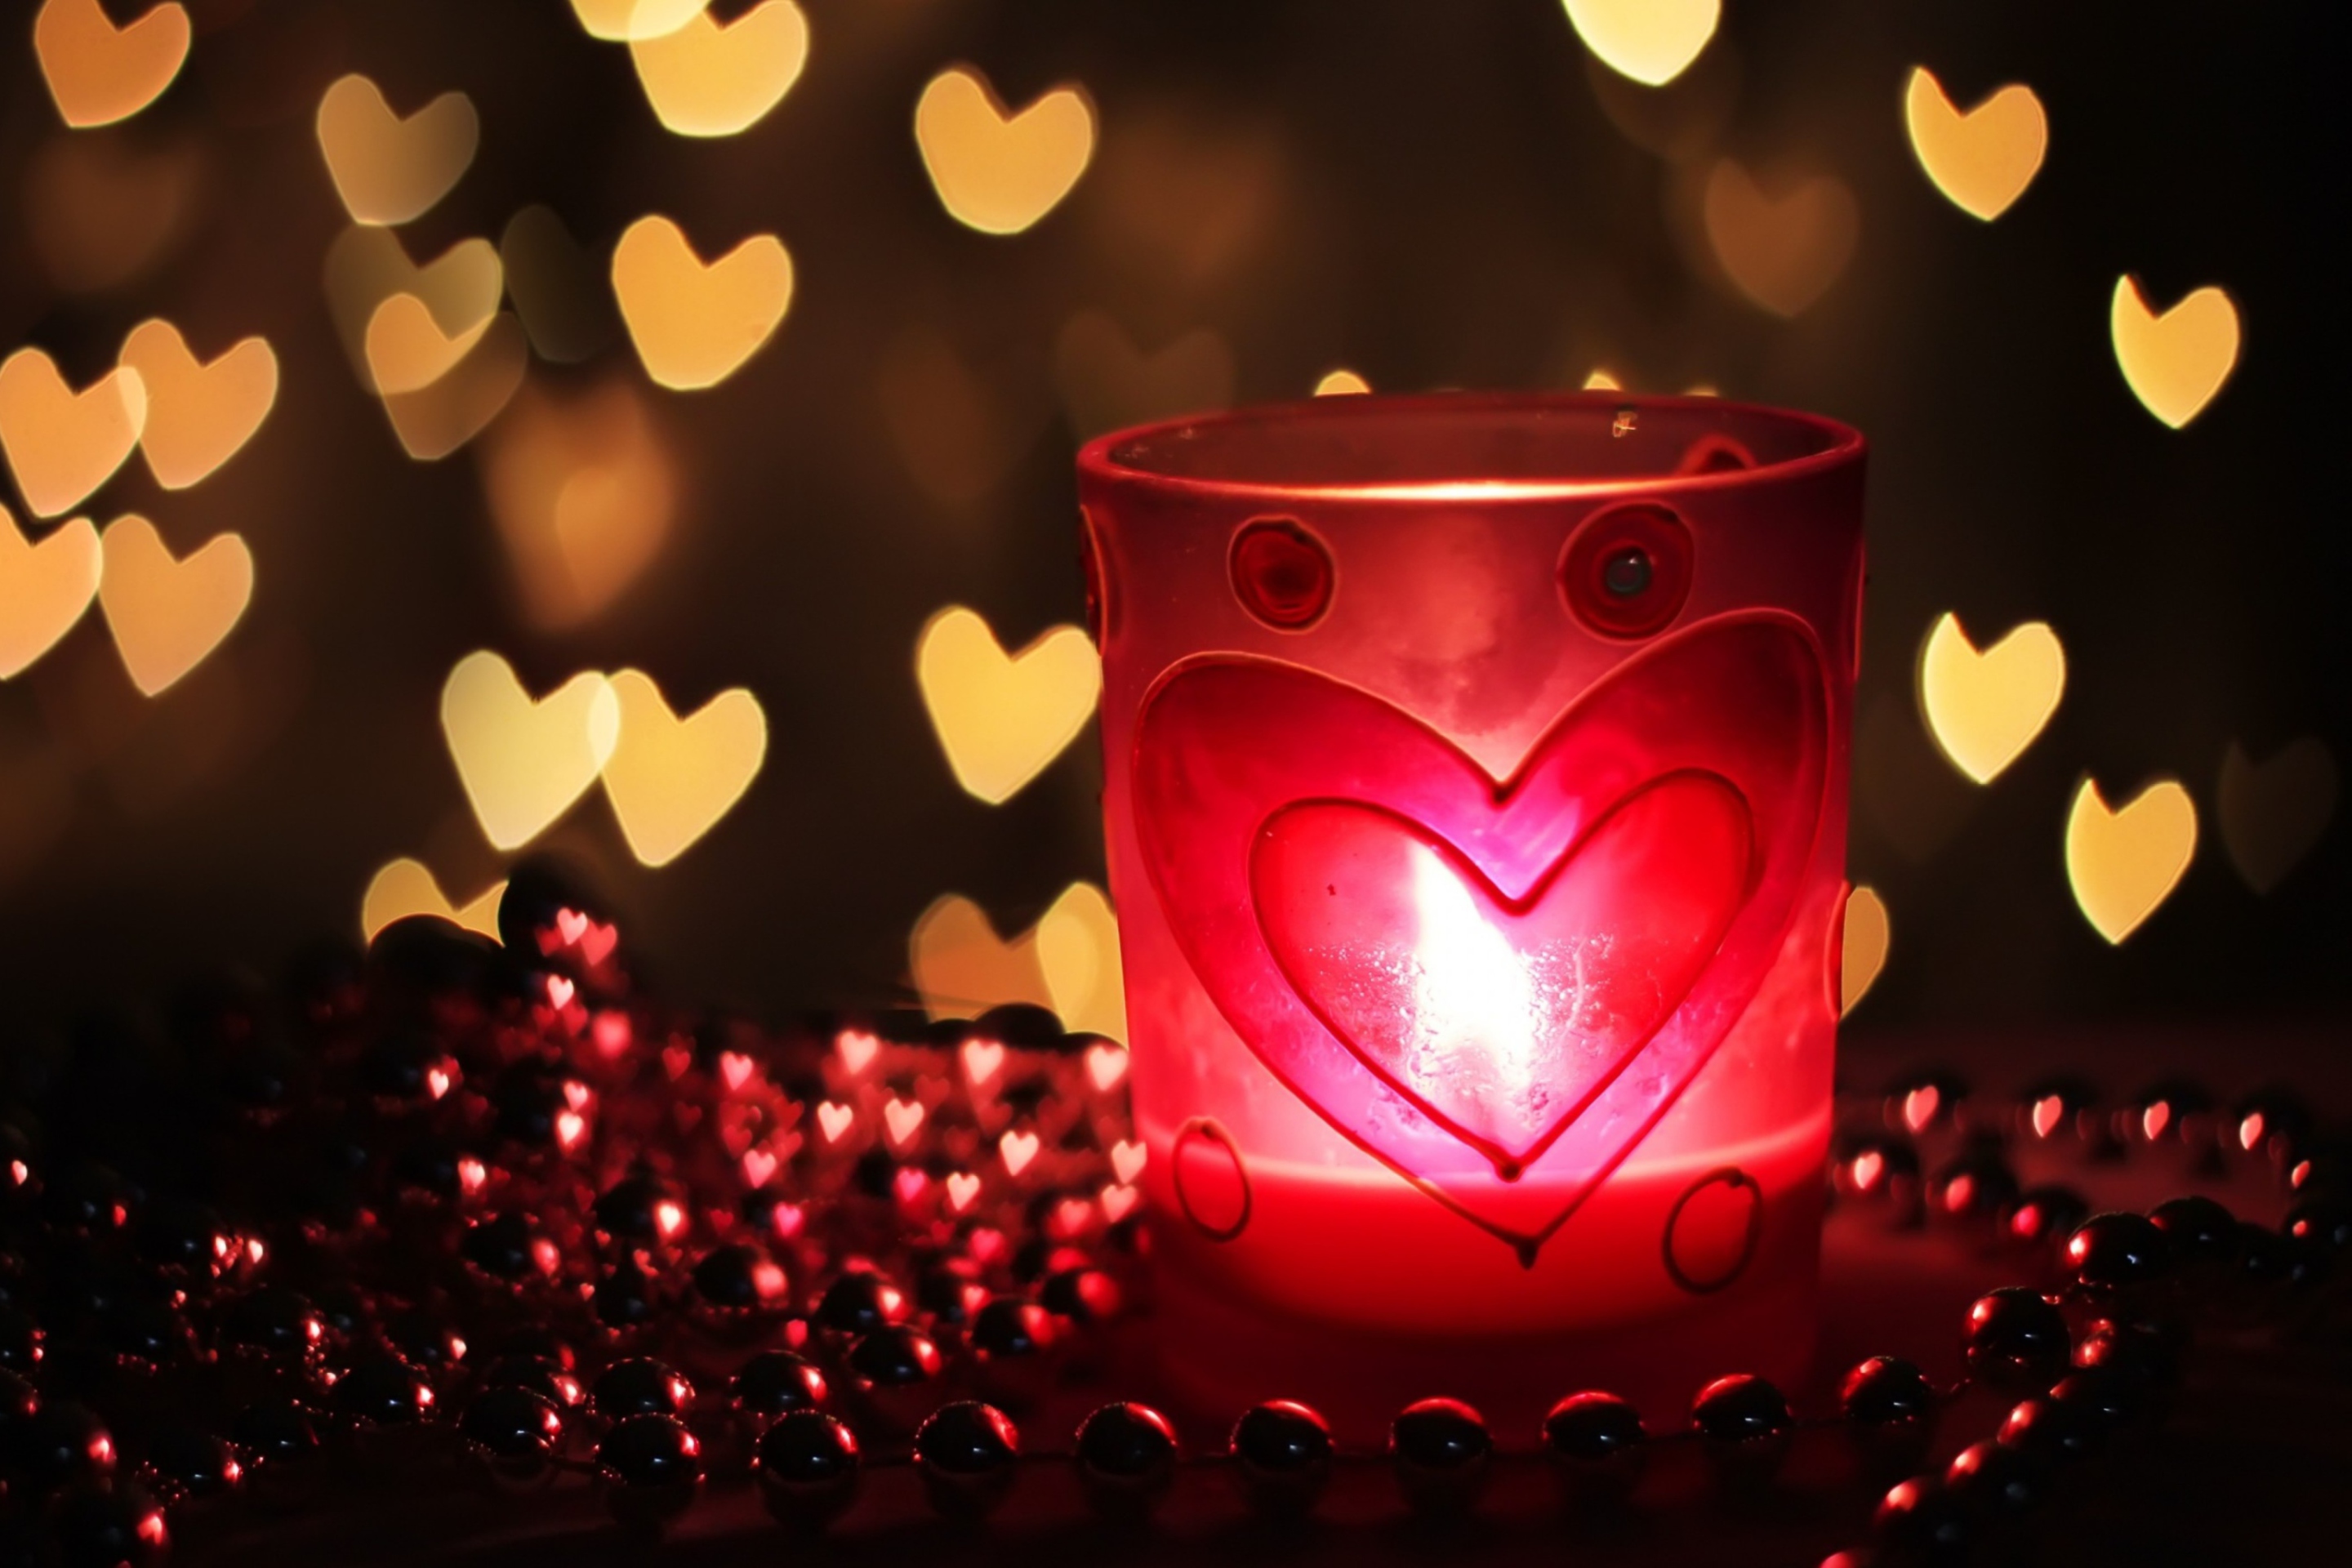 Love Candle wallpaper 2880x1920